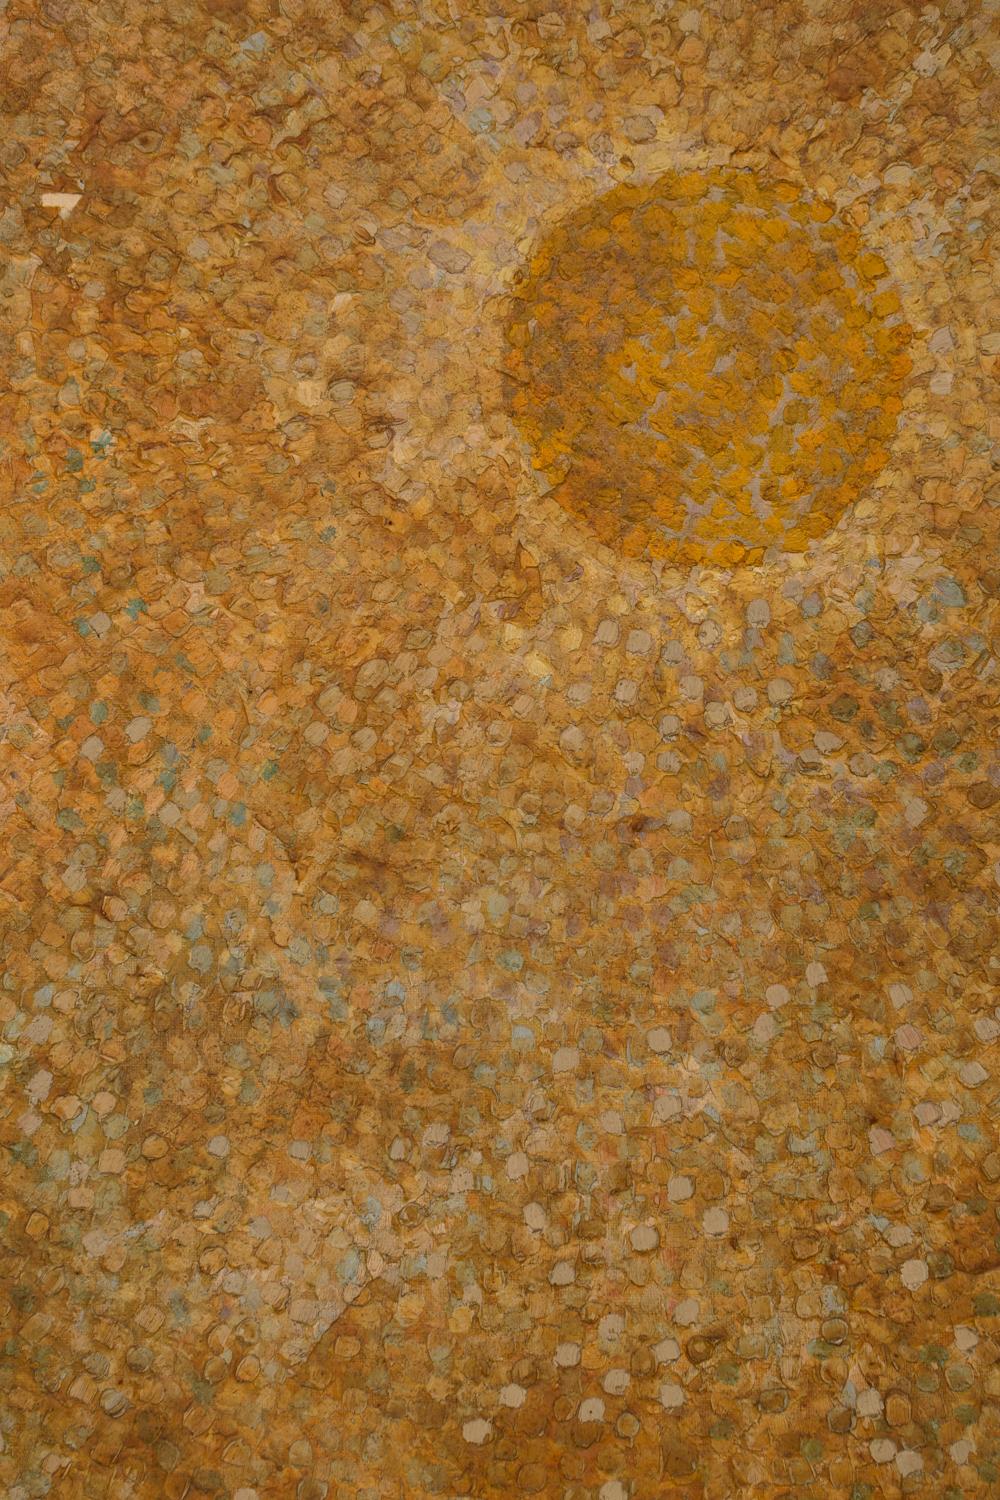 Architectural forms under sun. Pointillist in feeling. Oil on canvas, signed and dated: KOKU 1960.